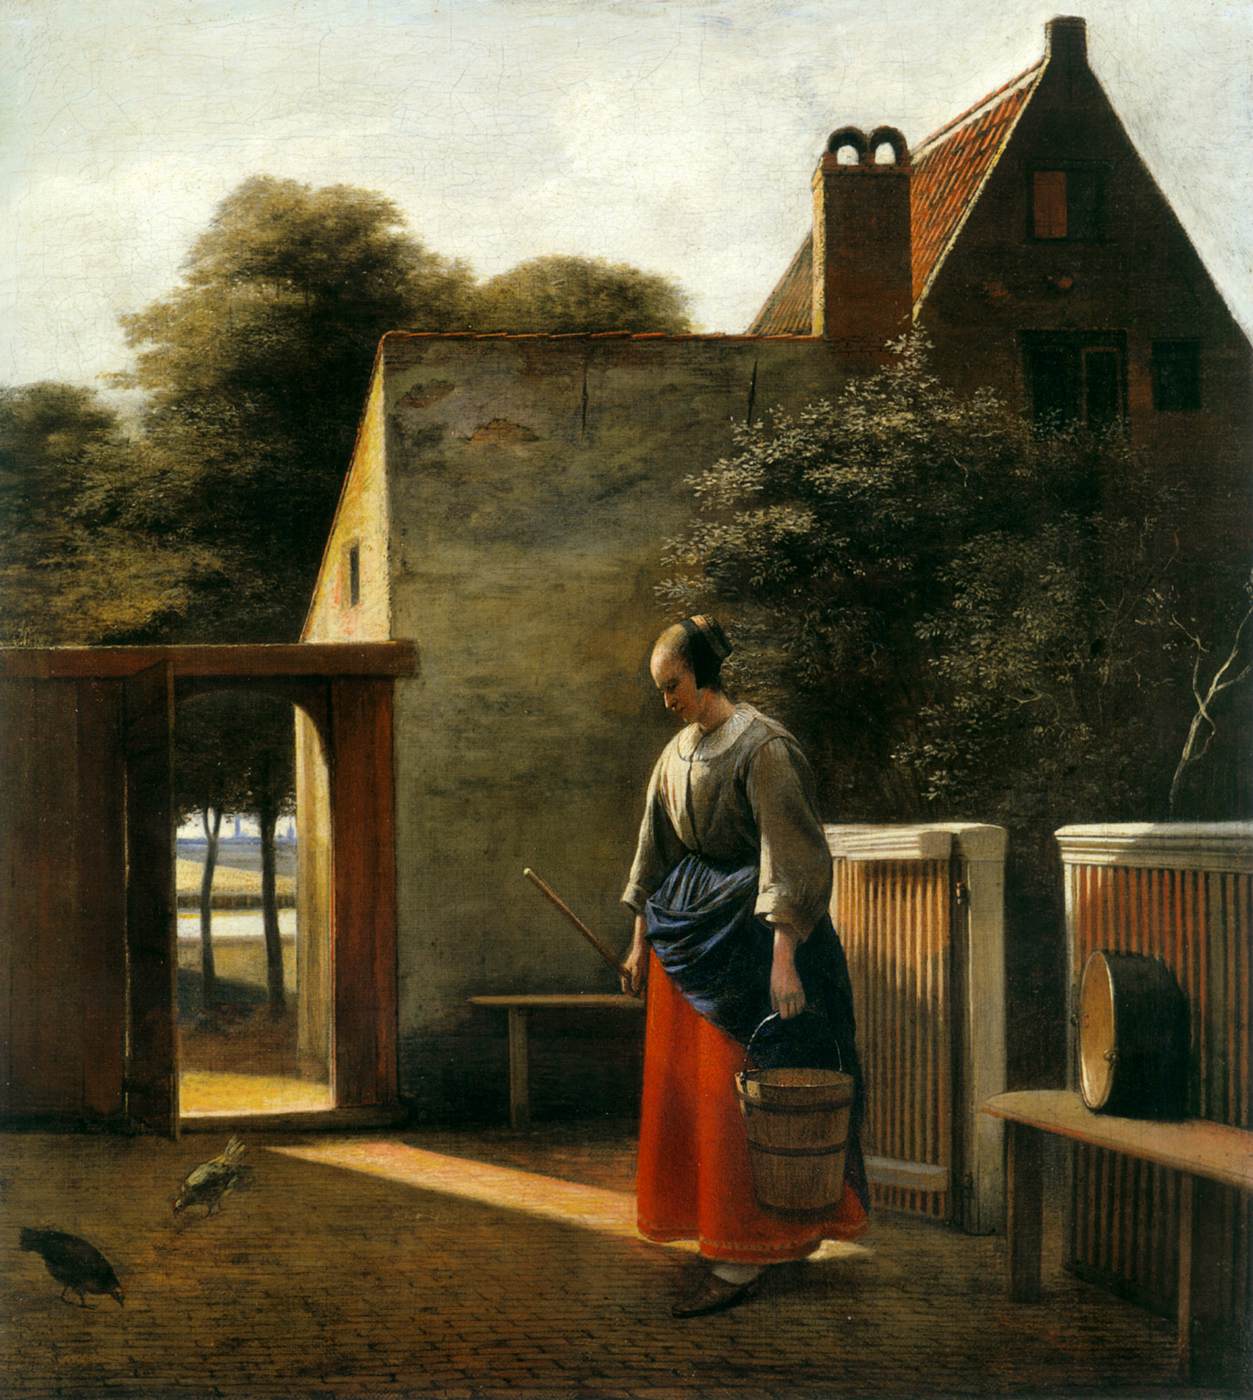 Maid with a Broom and Bucket in a Sunlit Patio